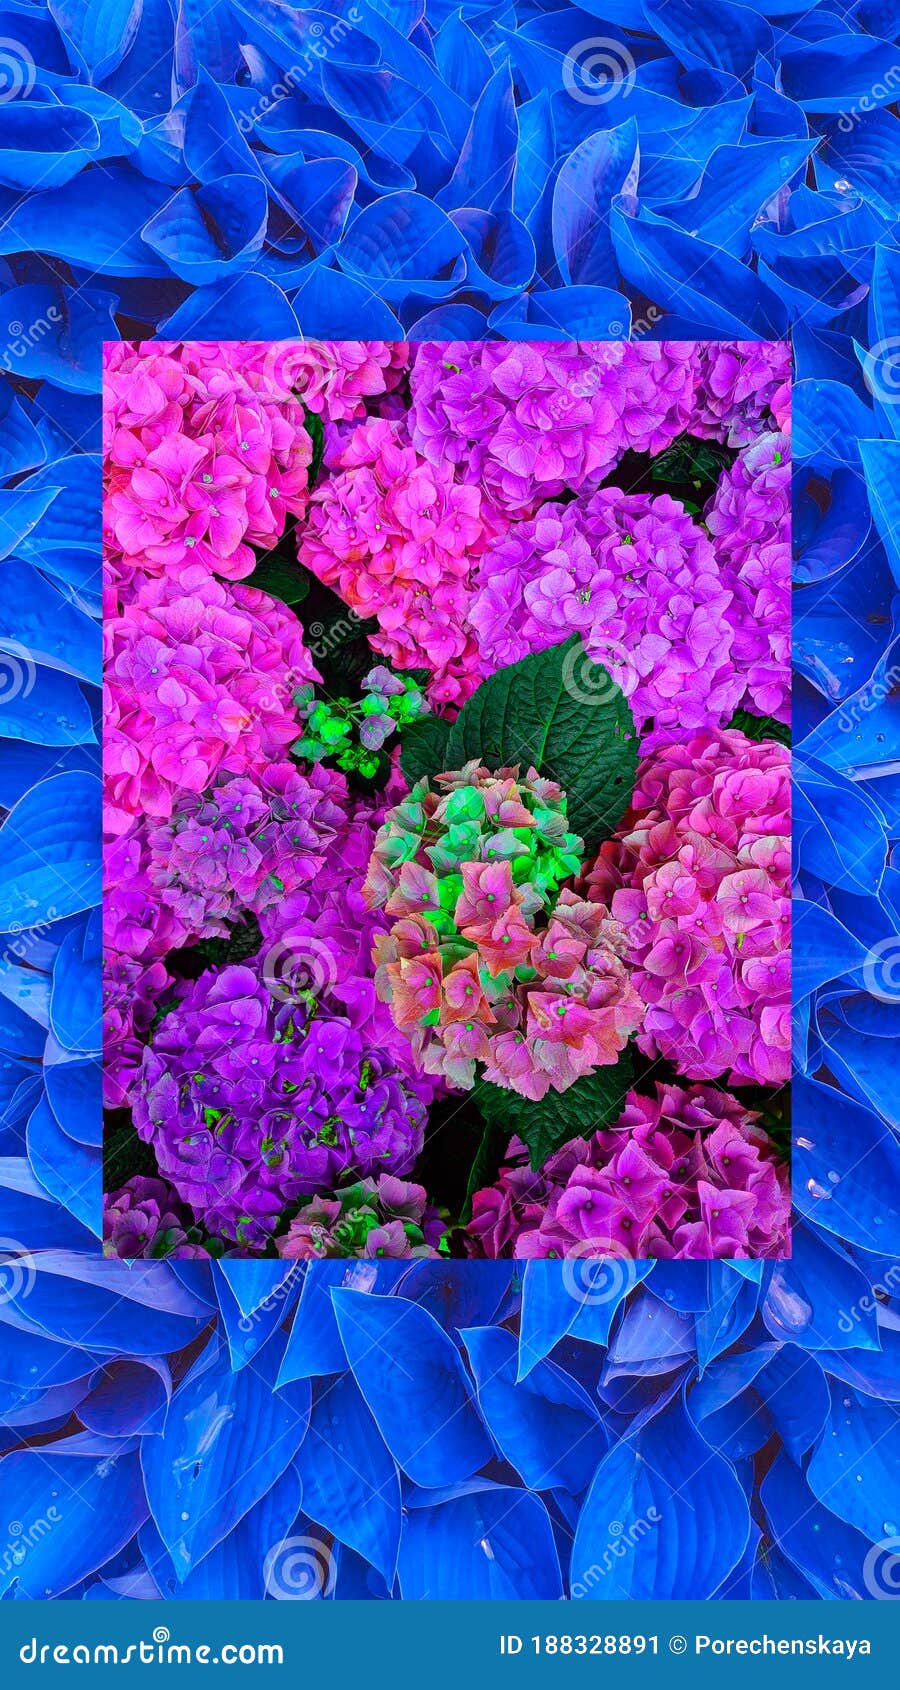 Fashion Aesthetic Wallpaper Phone Blue Flowers Bloom Background Spring Summer Mood Stock Image Image Of Wallpaper Summer 181